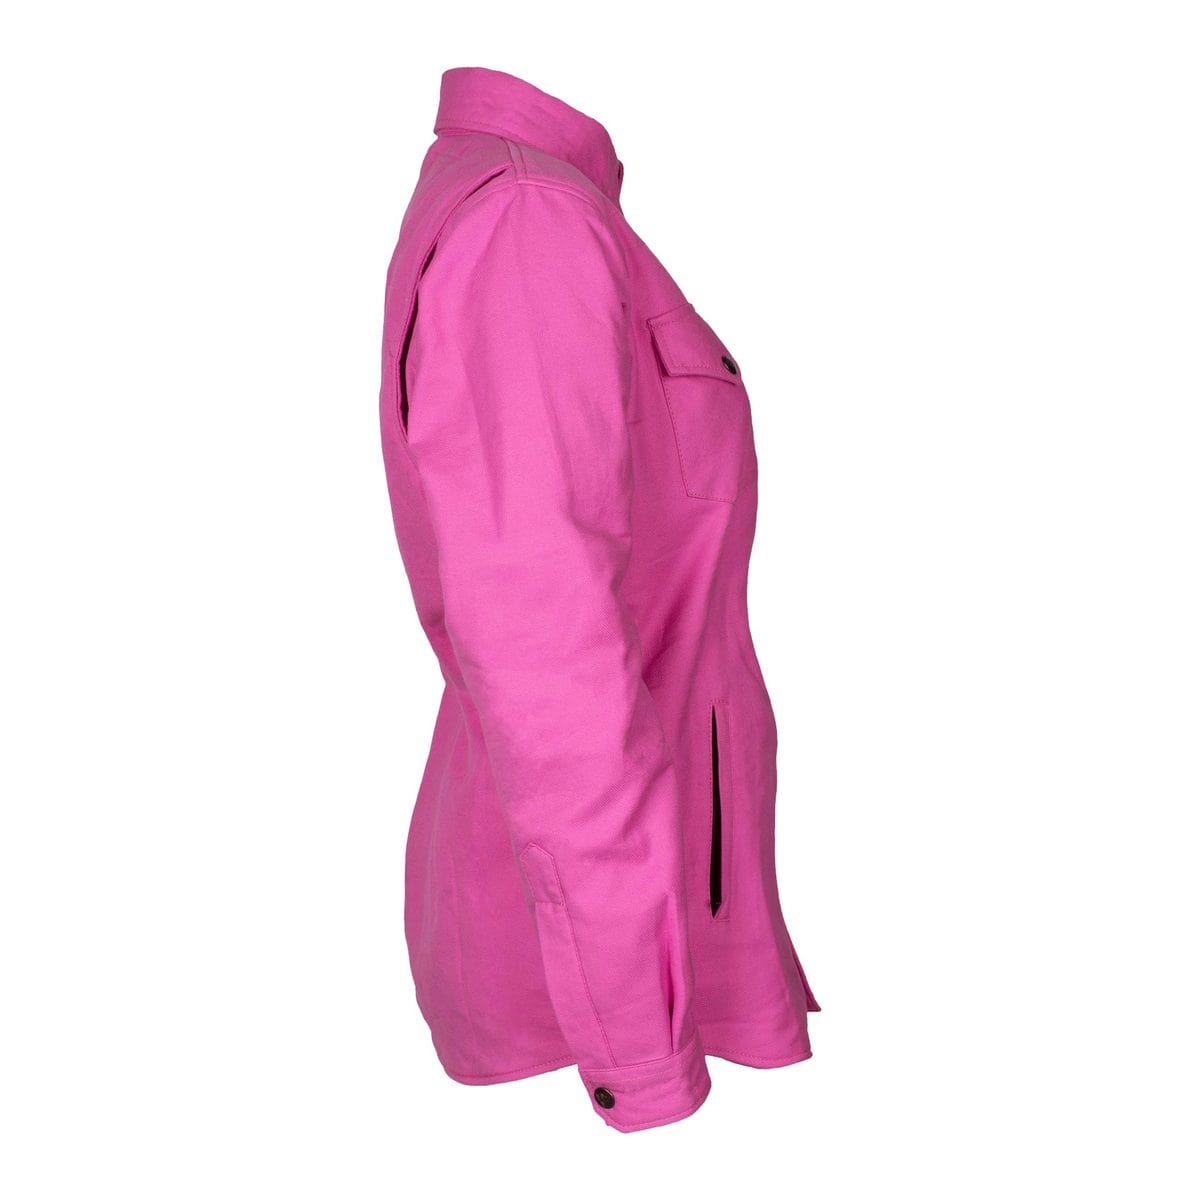 Protective Flannel Shirt for Women - Pink Solid with Pads